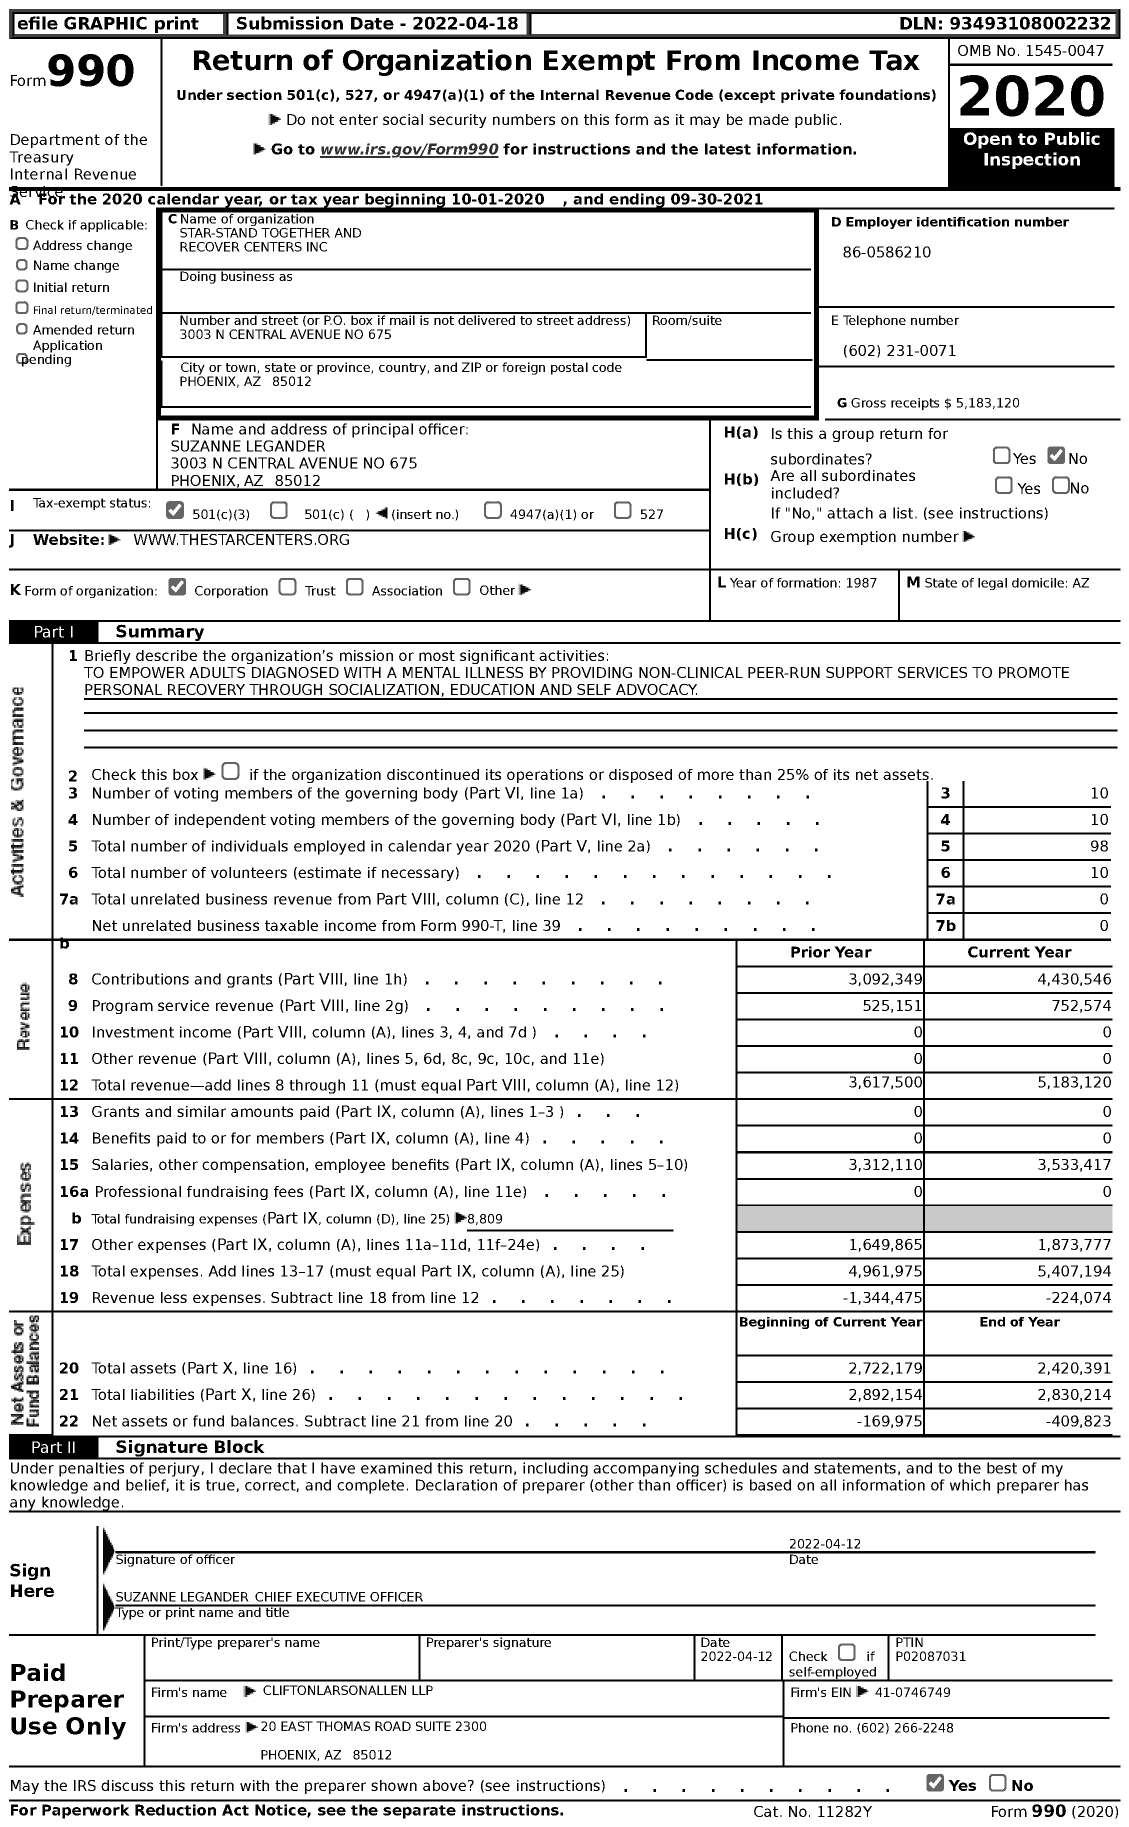 Image of first page of 2020 Form 990 for Star-Stand Together and Recover Centers